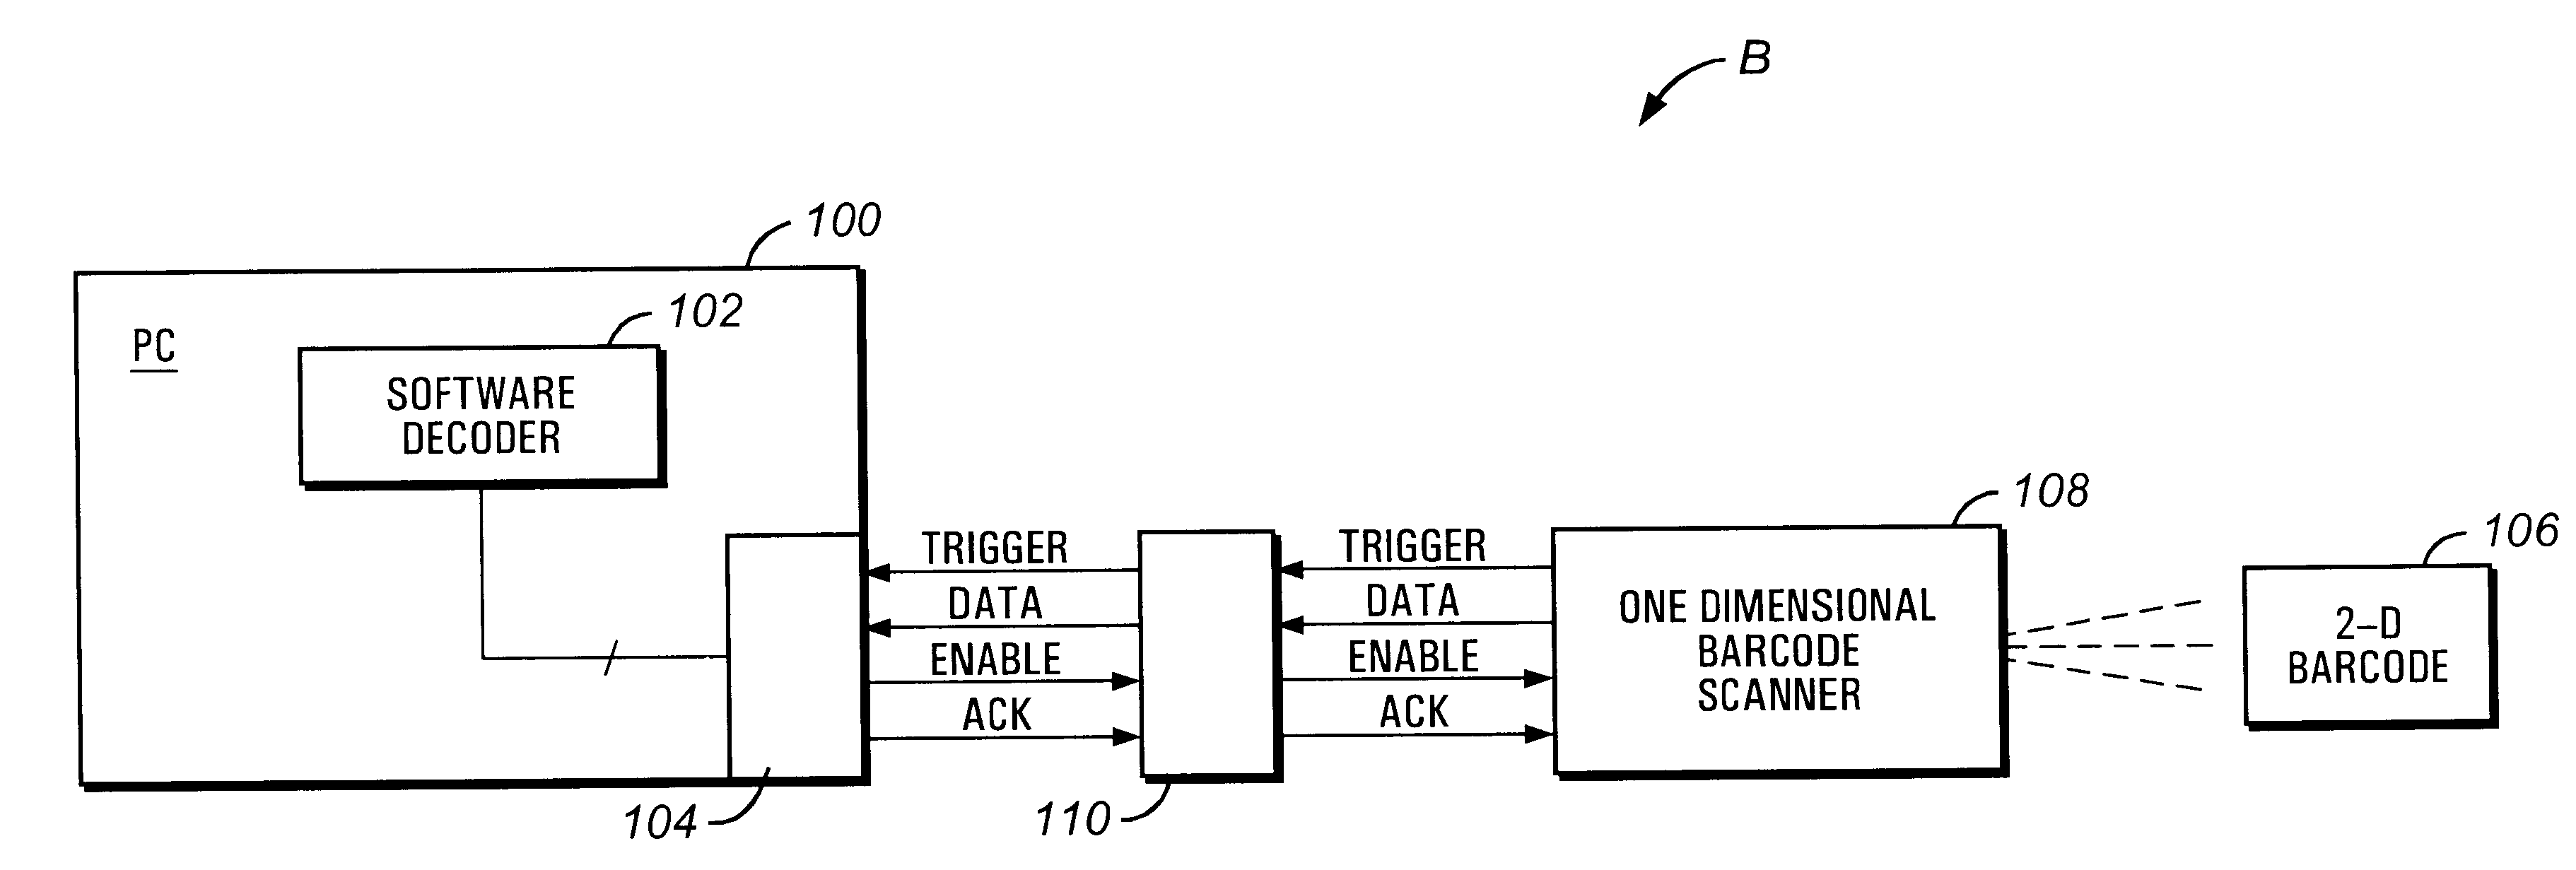 Scanning system for decoding two-dimensional barcode symbologies with a one-dimensional general purpose scanner